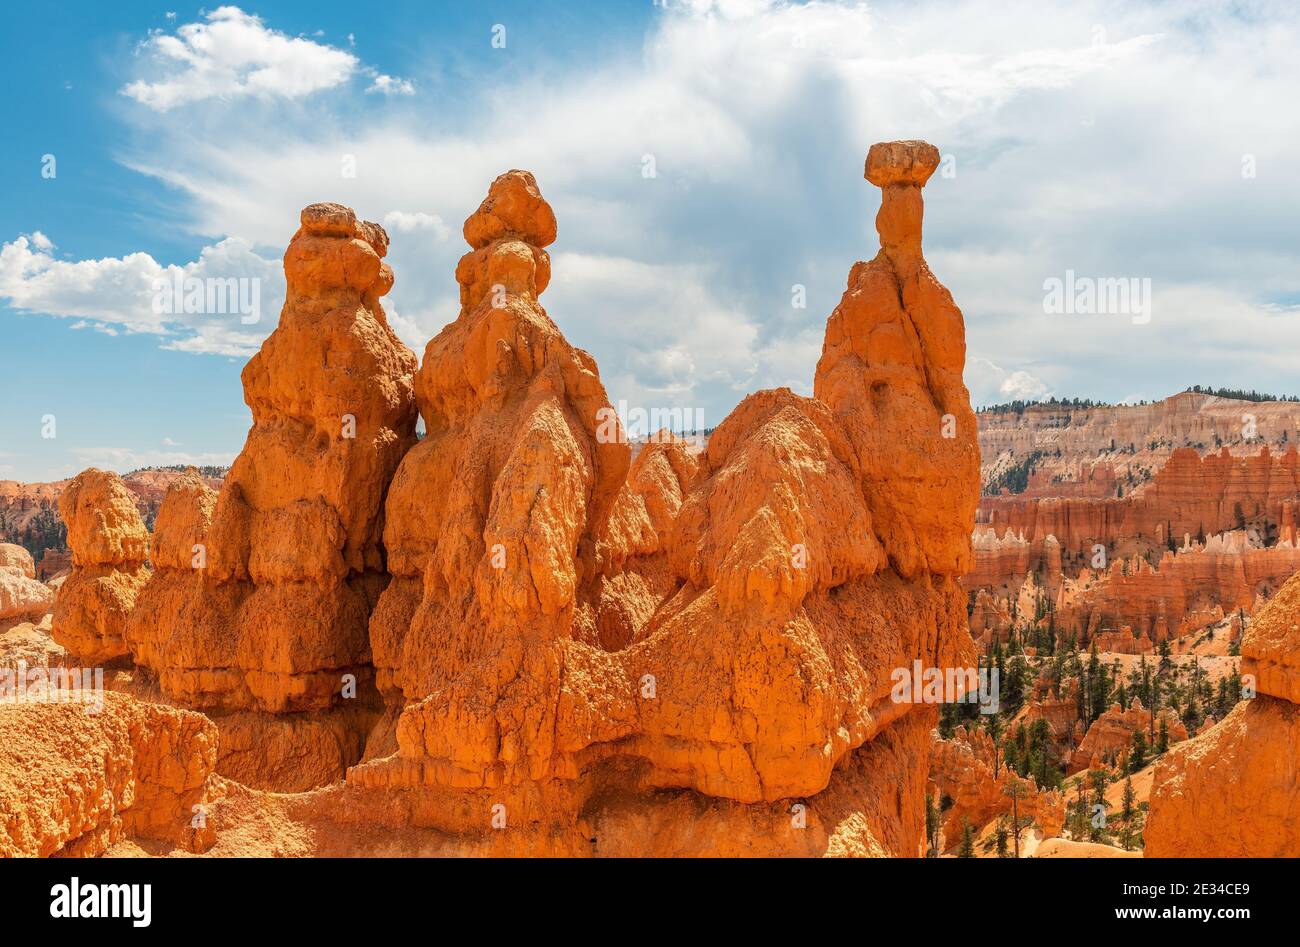 Hoodoo sandstone rock formations with Thor's hammer, Bryce Canyon national  park, Utah, United States of America (USA Stock Photo - Alamy